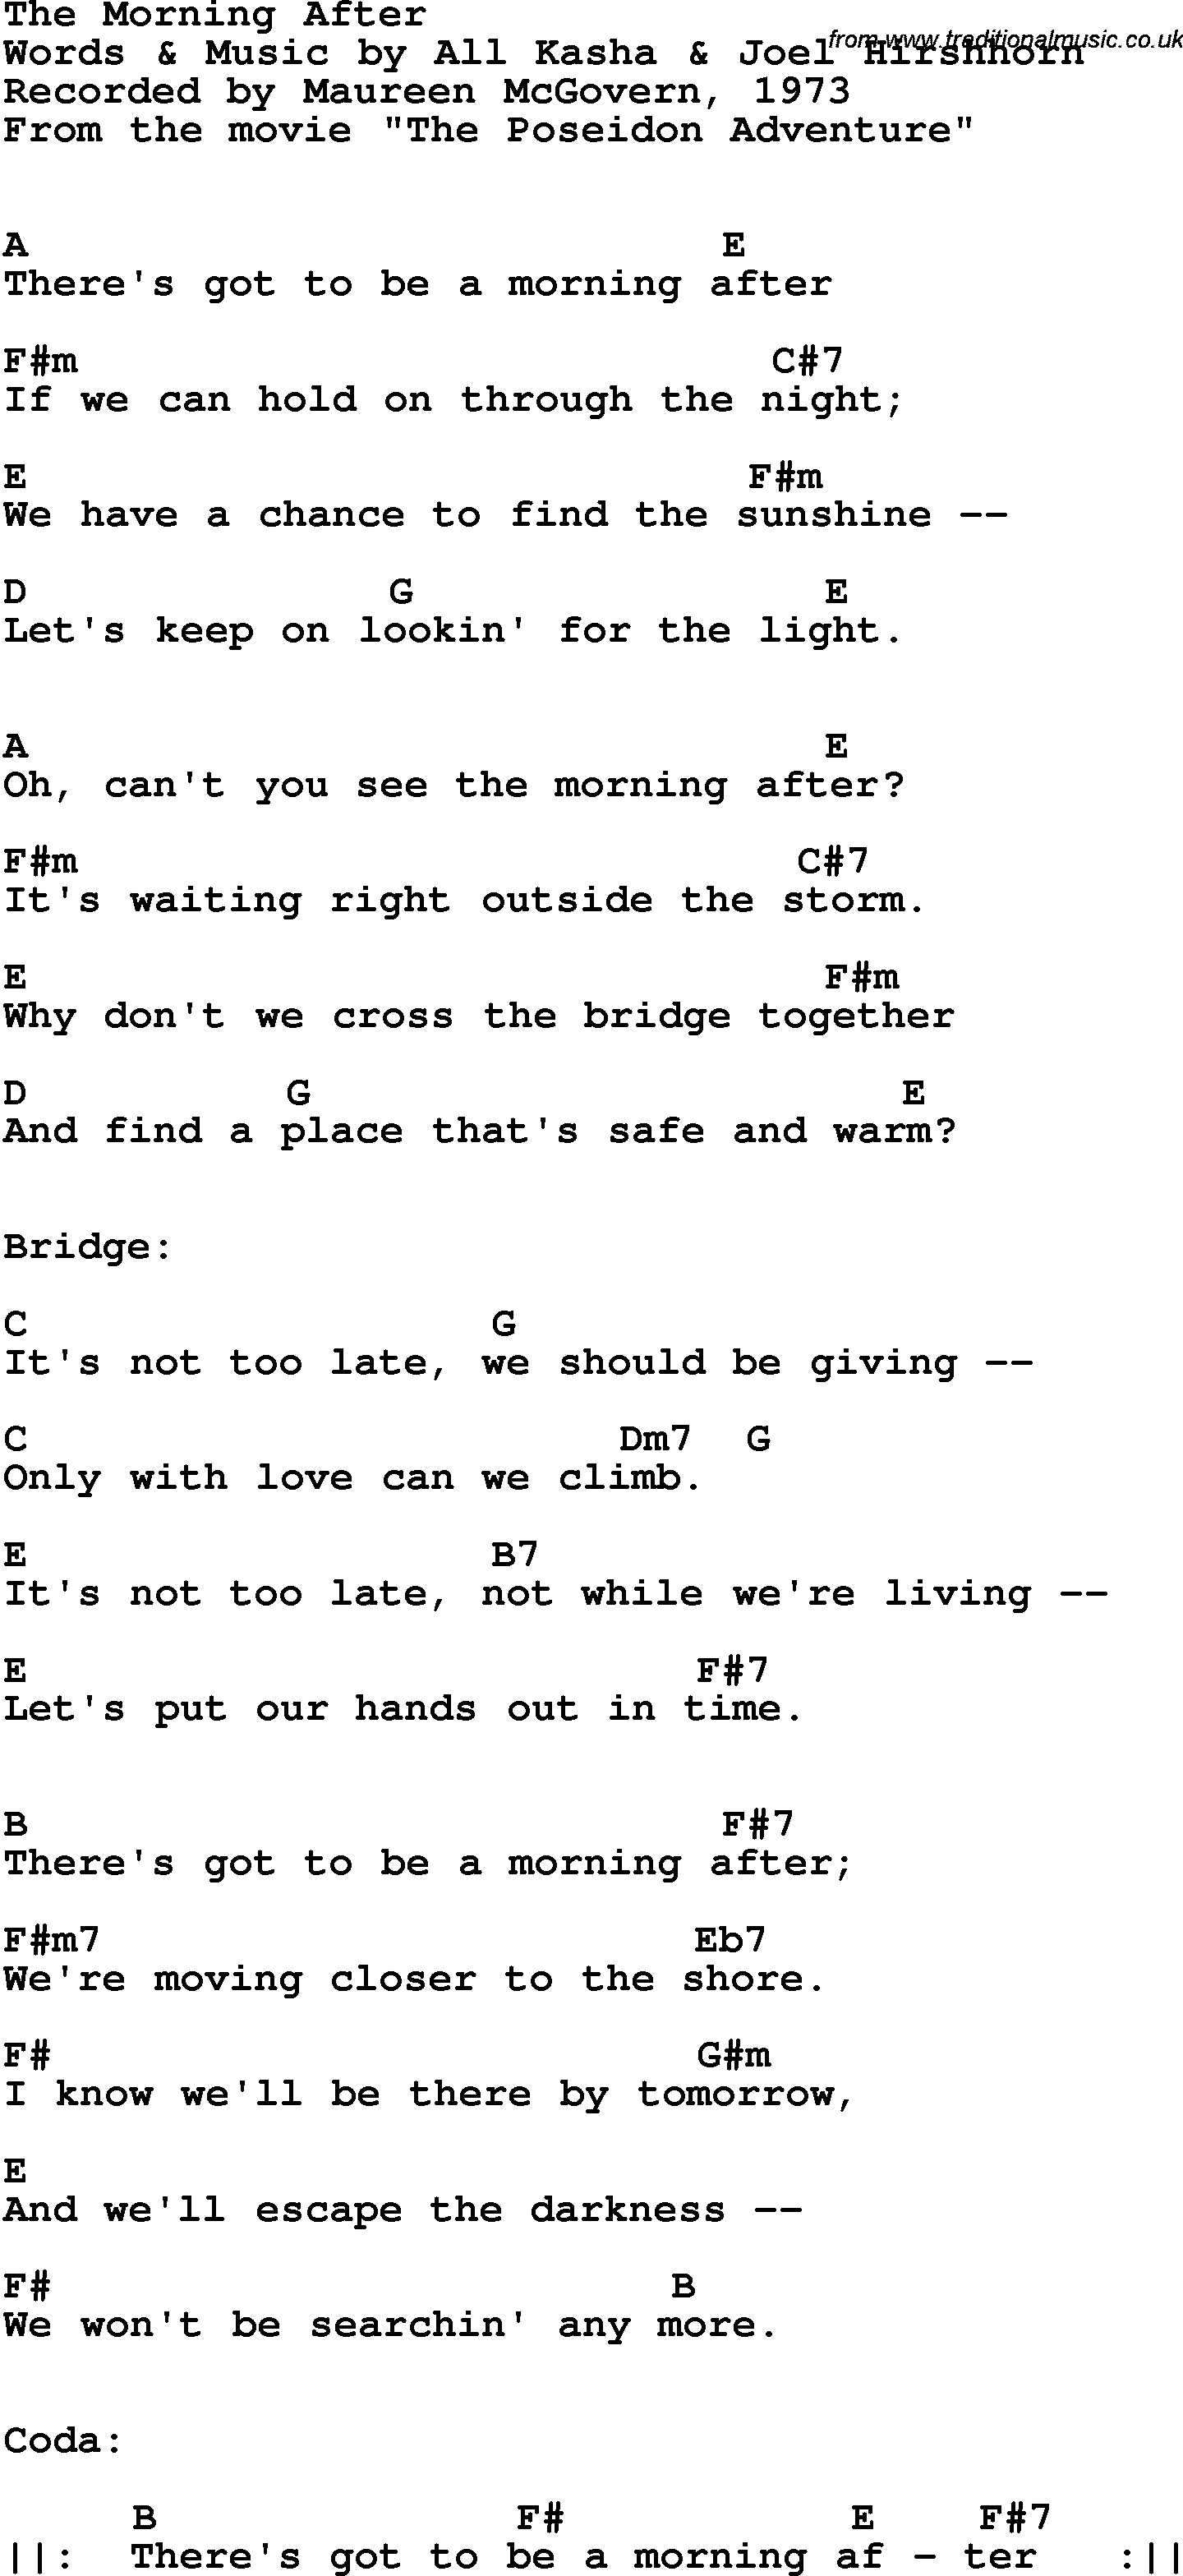 Song Lyrics with guitar chords for Morning After, The - Maureen Mcgovern, 1973